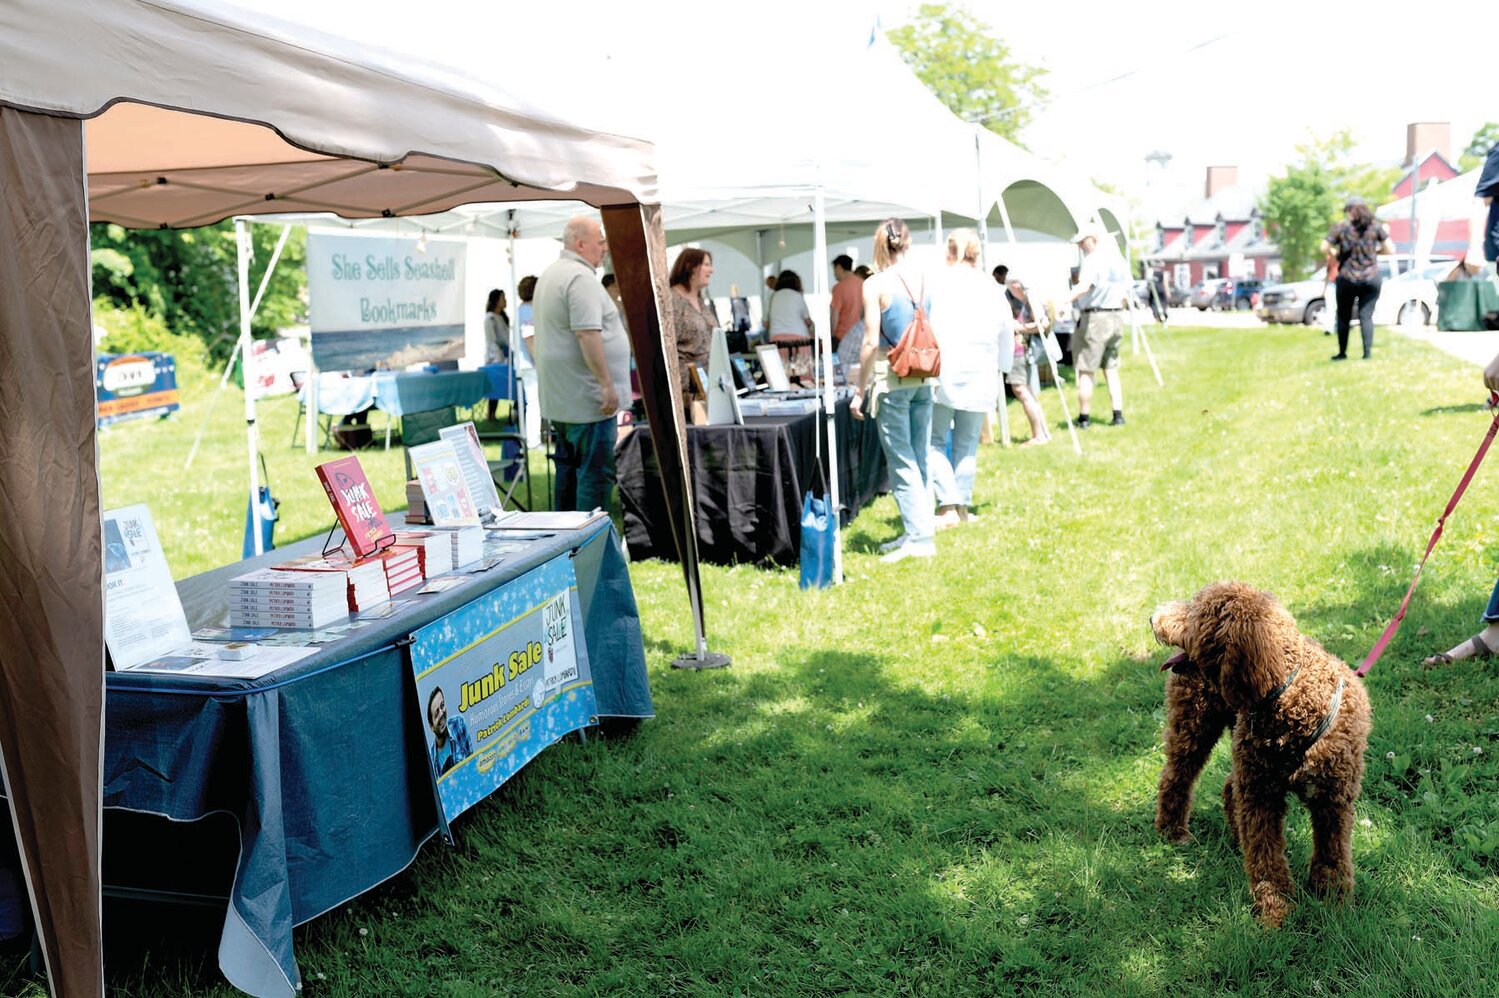 Customers shop for books during a past Flemington Summer Book Fest, which returns to the Hunterdon County town this weekend.